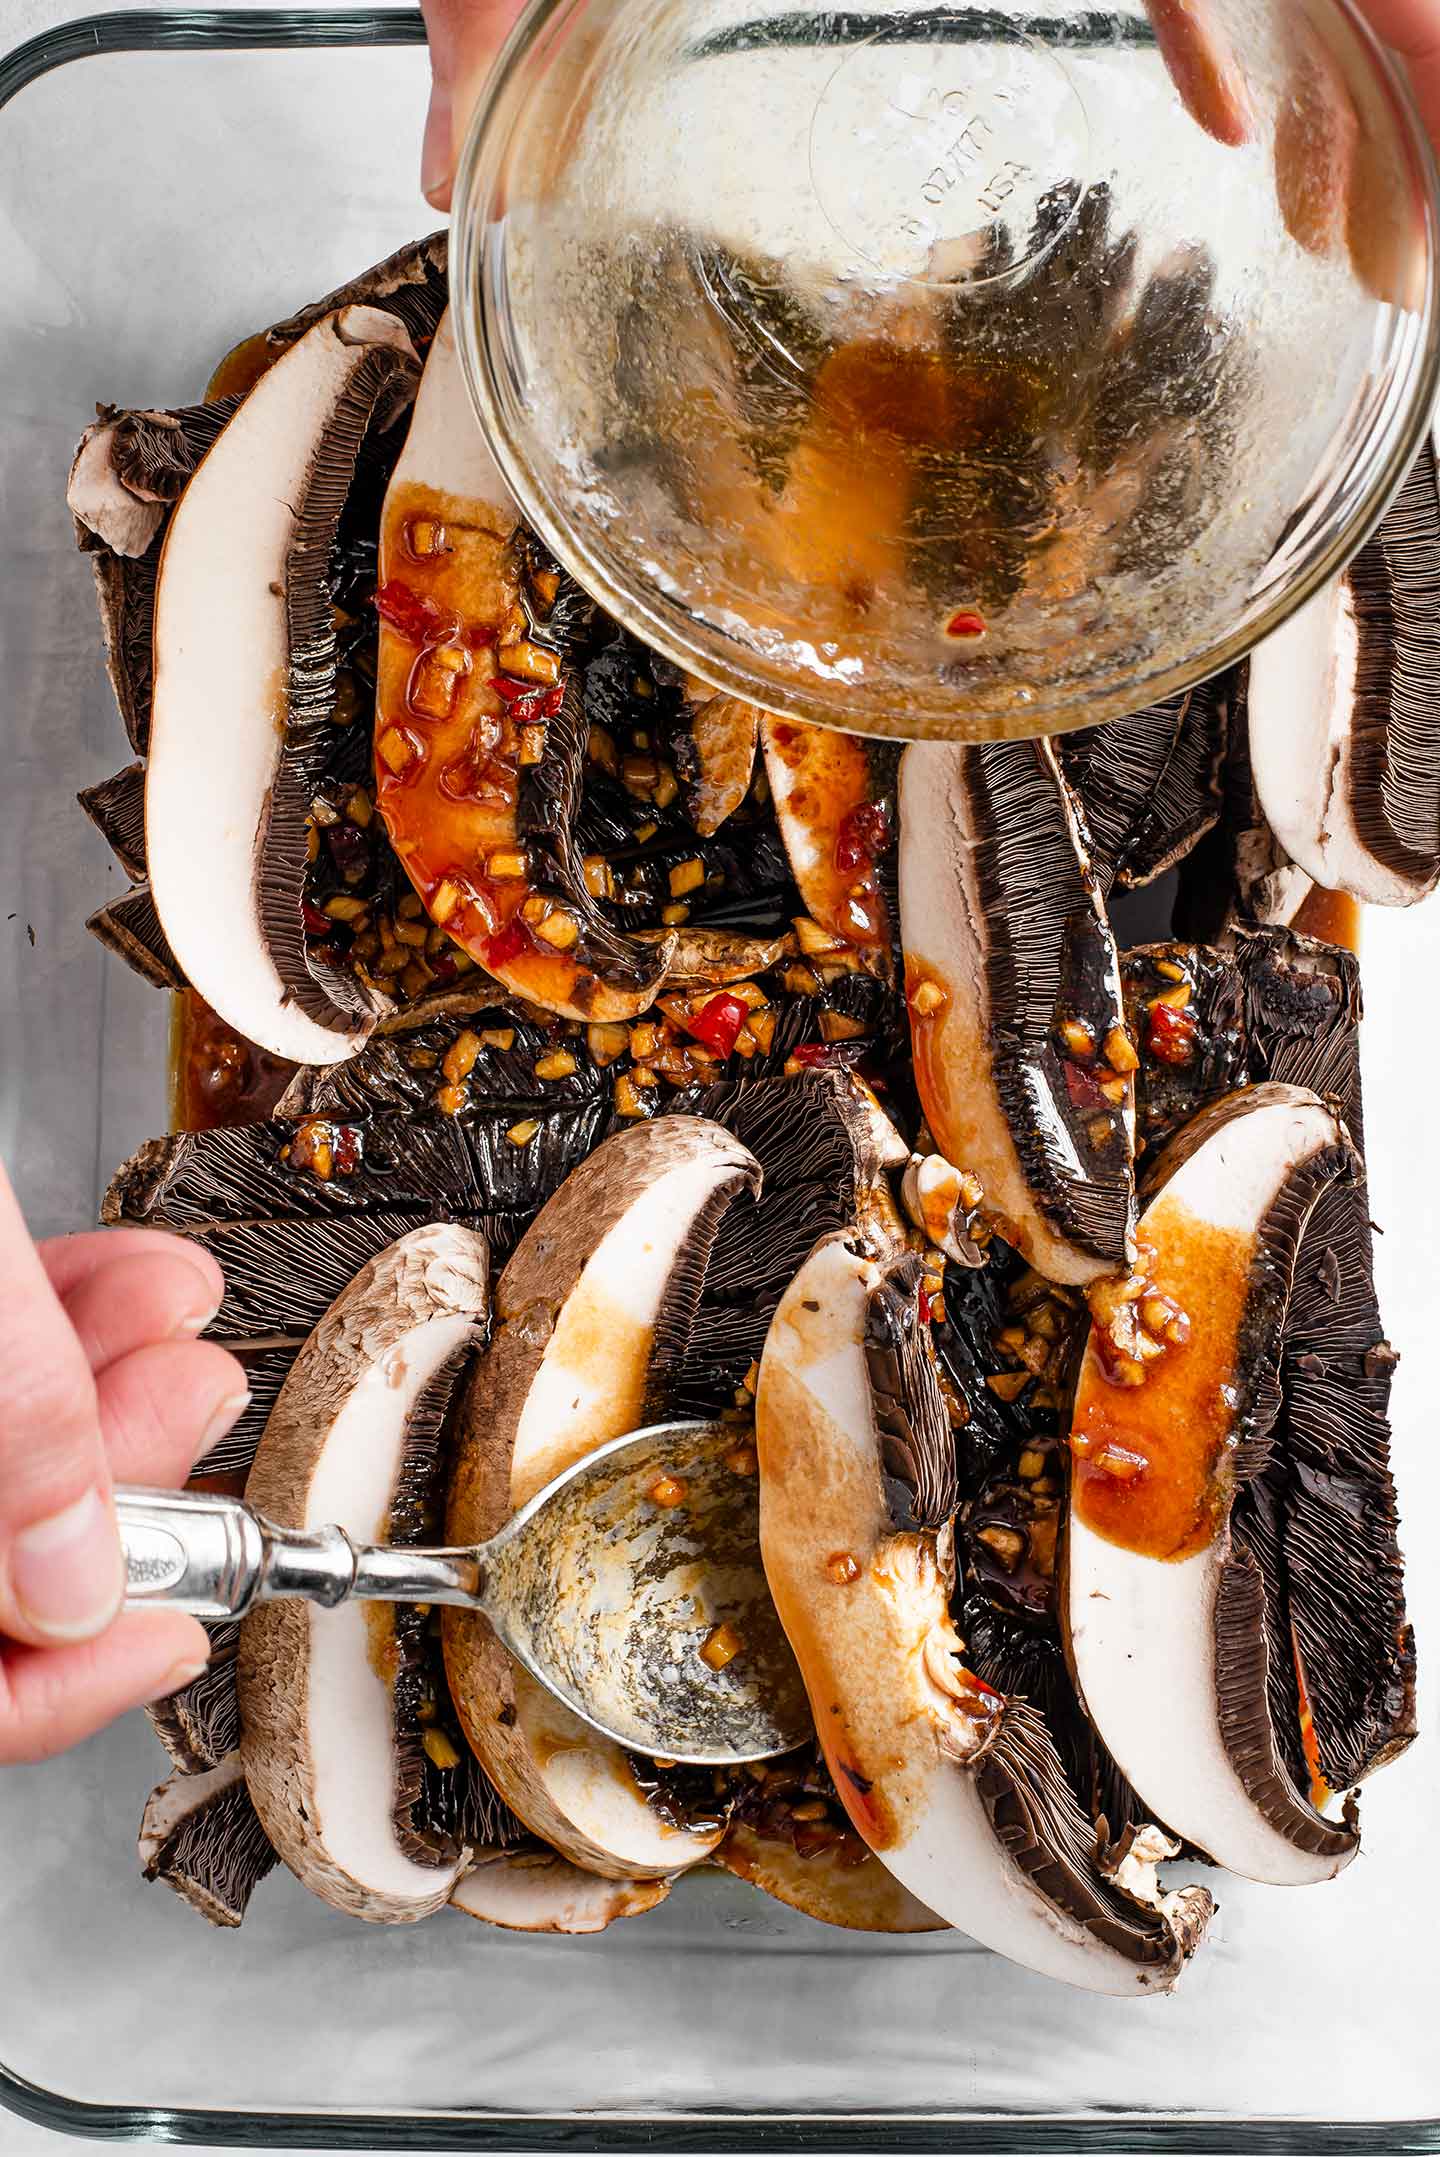 Top down view of a dark marinade with minced ginger and chilli pepper being poured over sliced portobello mushroom.